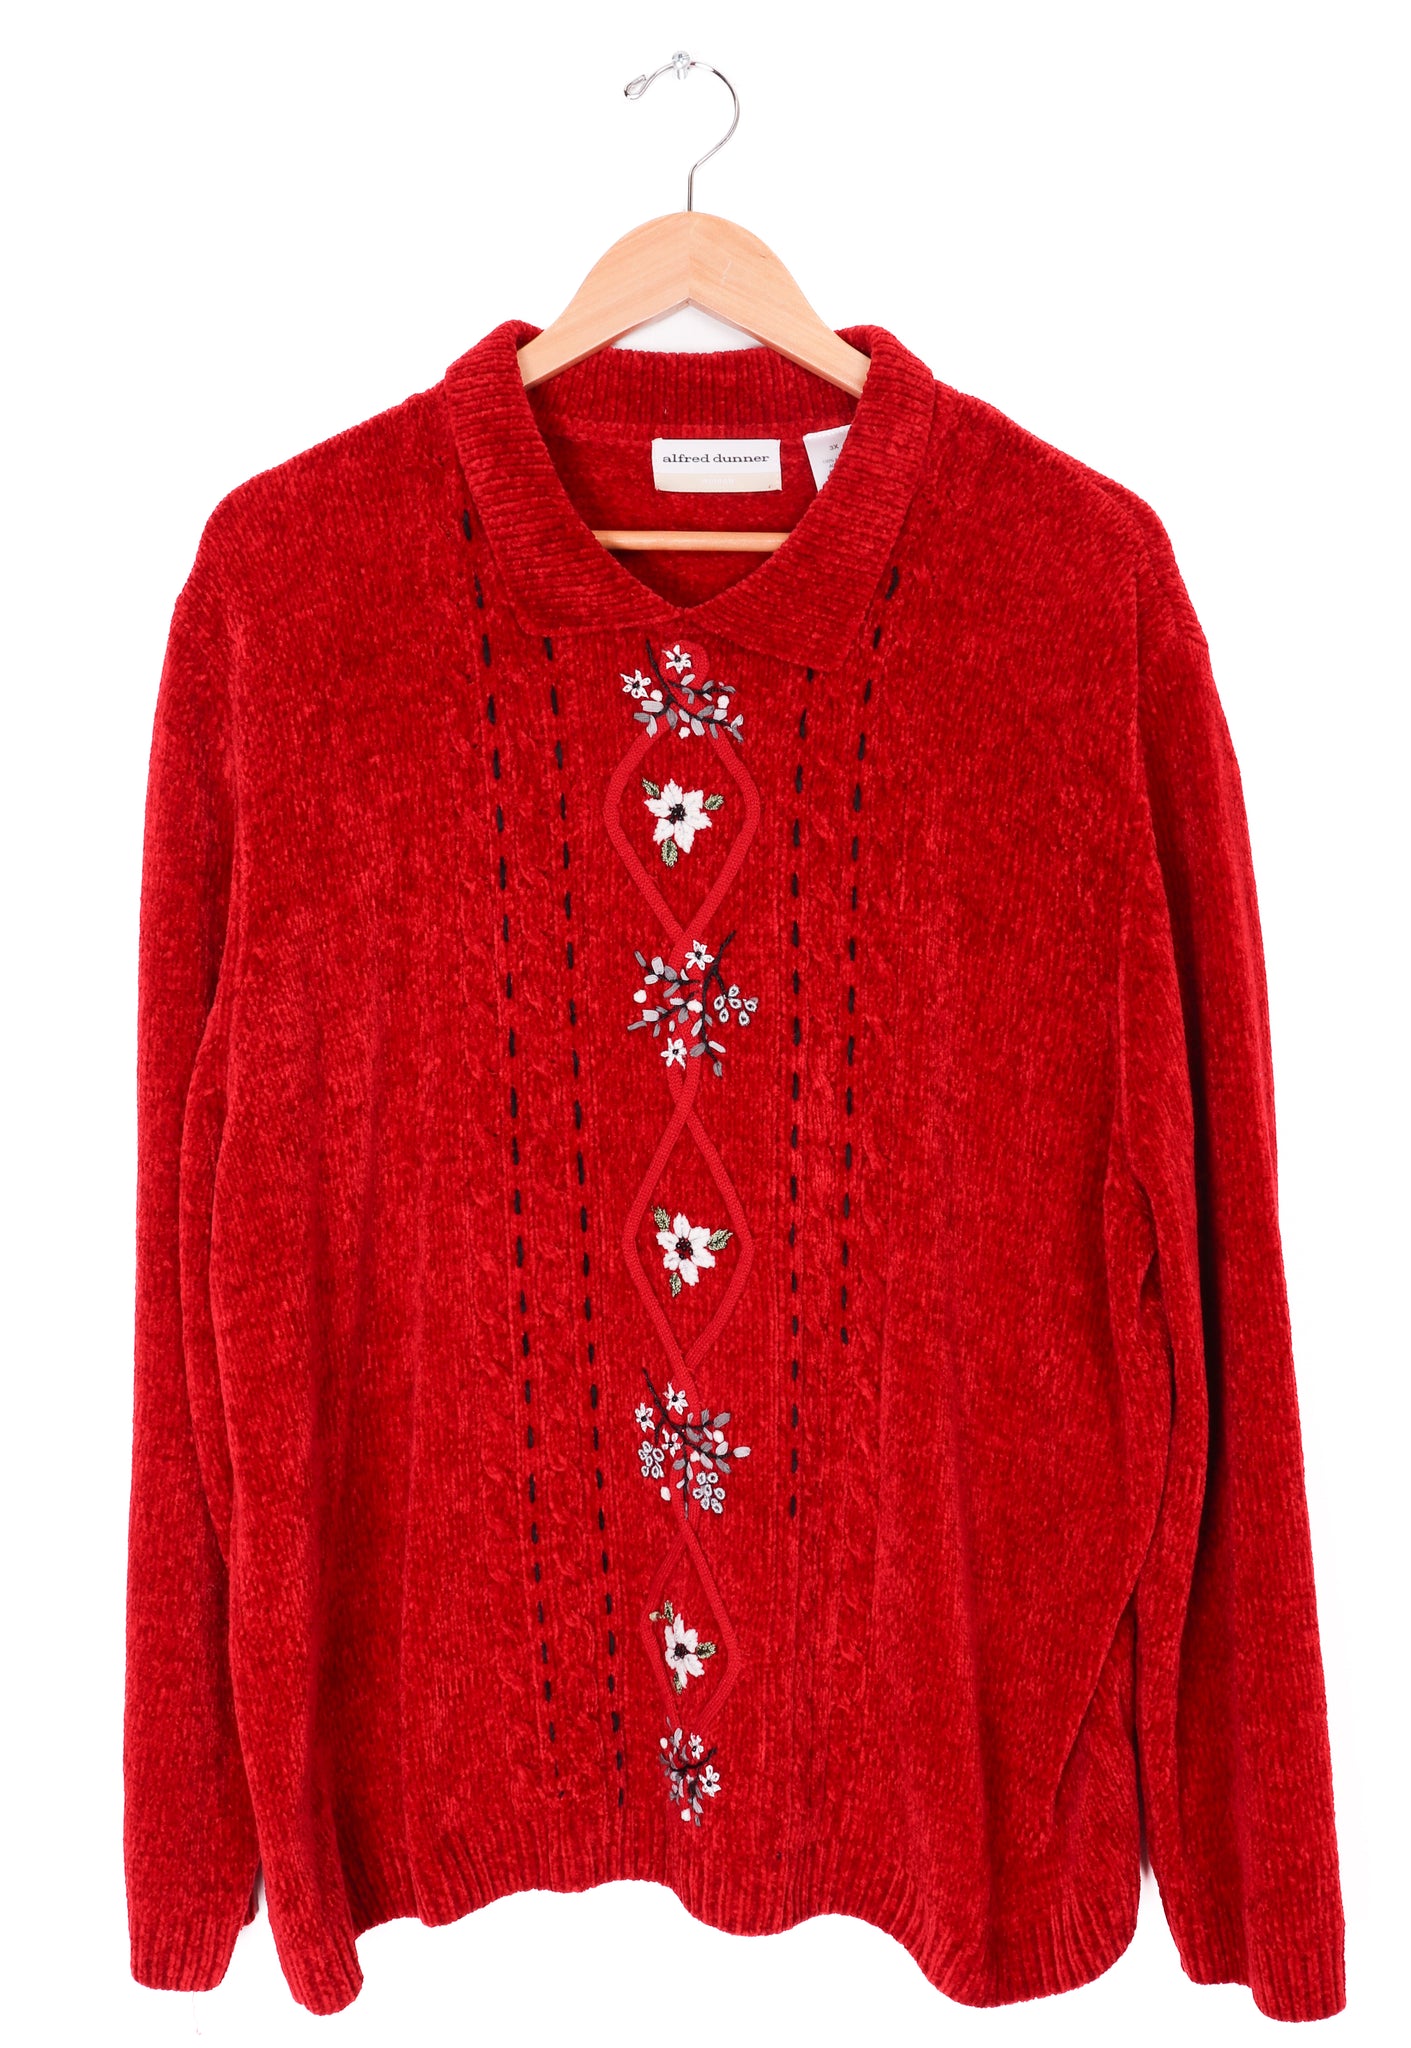 Alfred Dunner Red Knit Flowers Sweater